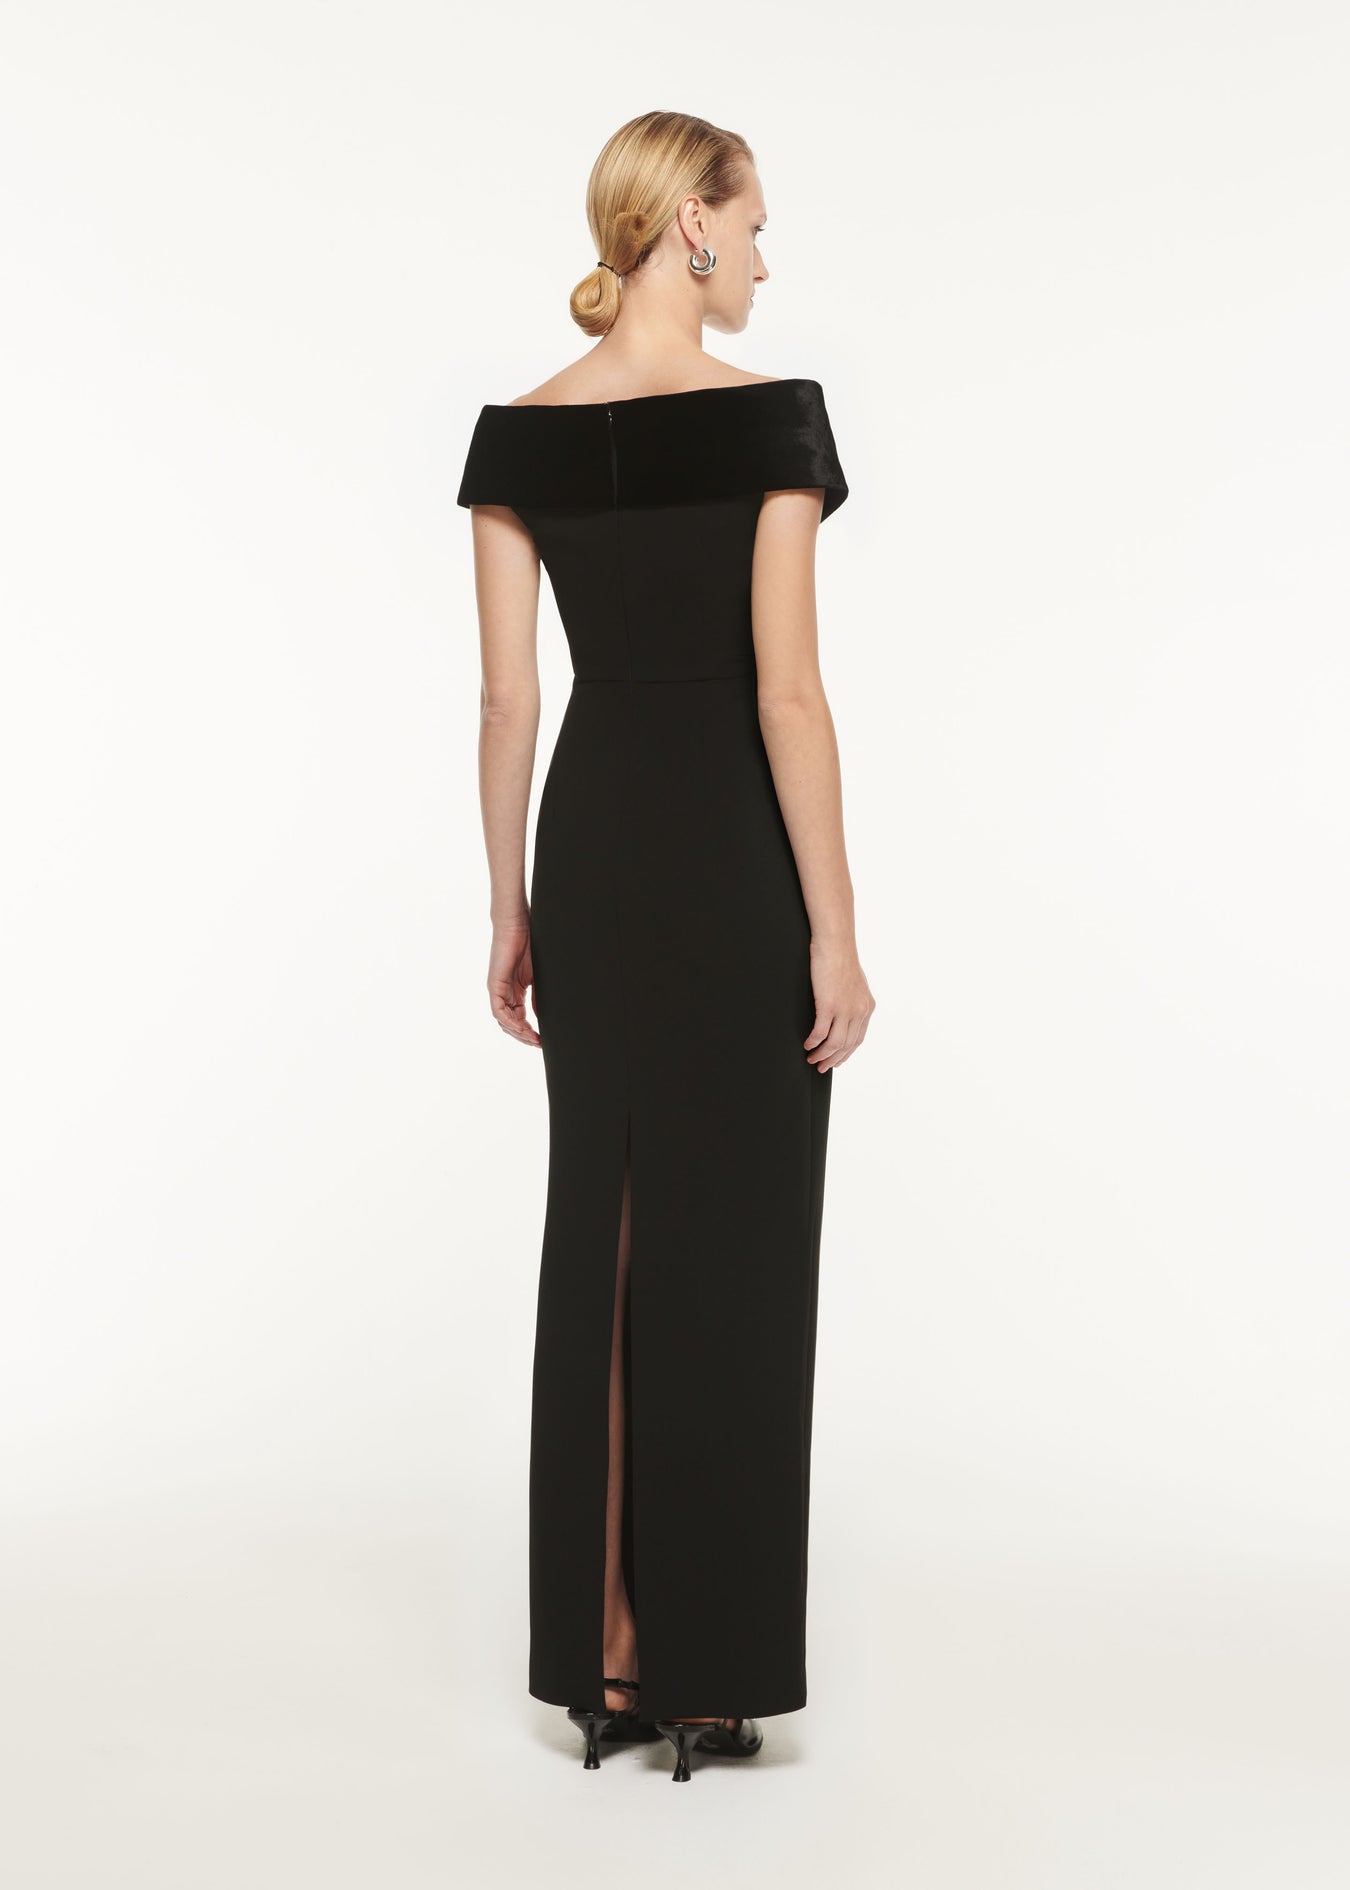 The back of a woman wearing the Off The Shoulder Stretch Cady Maxi Dress Black